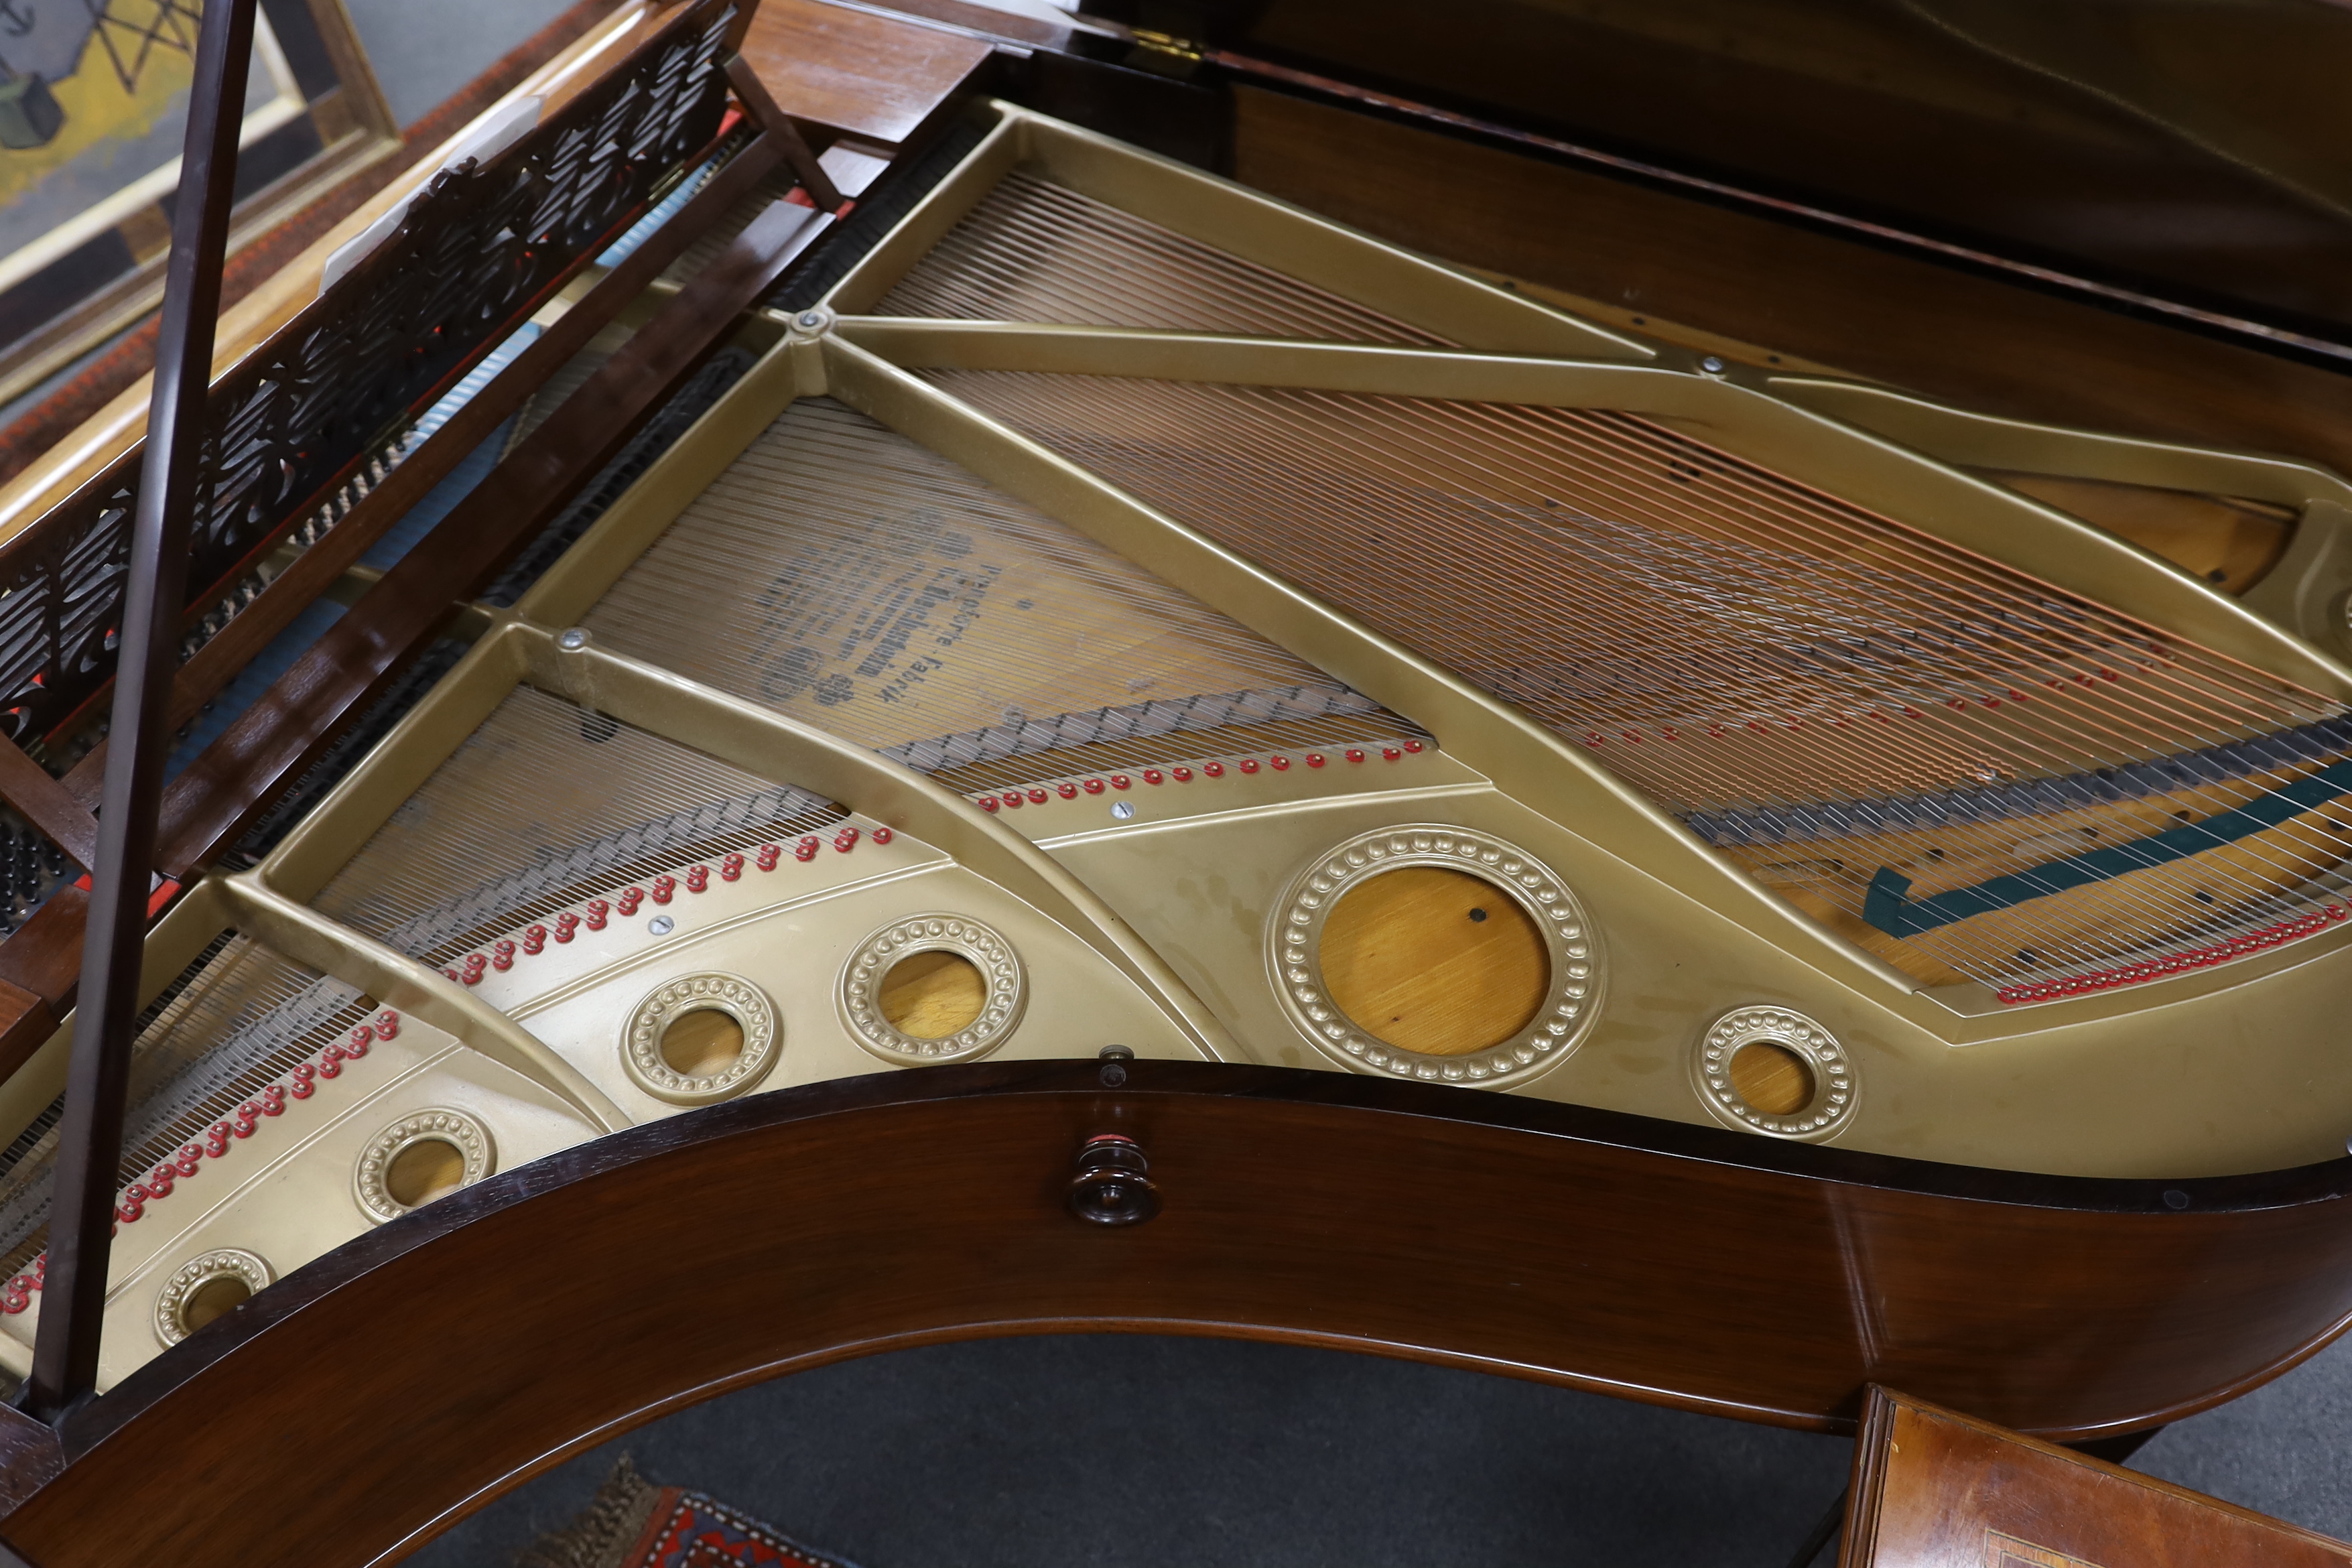 A Bechstein model Va rosewood grand piano, serial number 20333, width 146cm, length 200cm, height 98cm